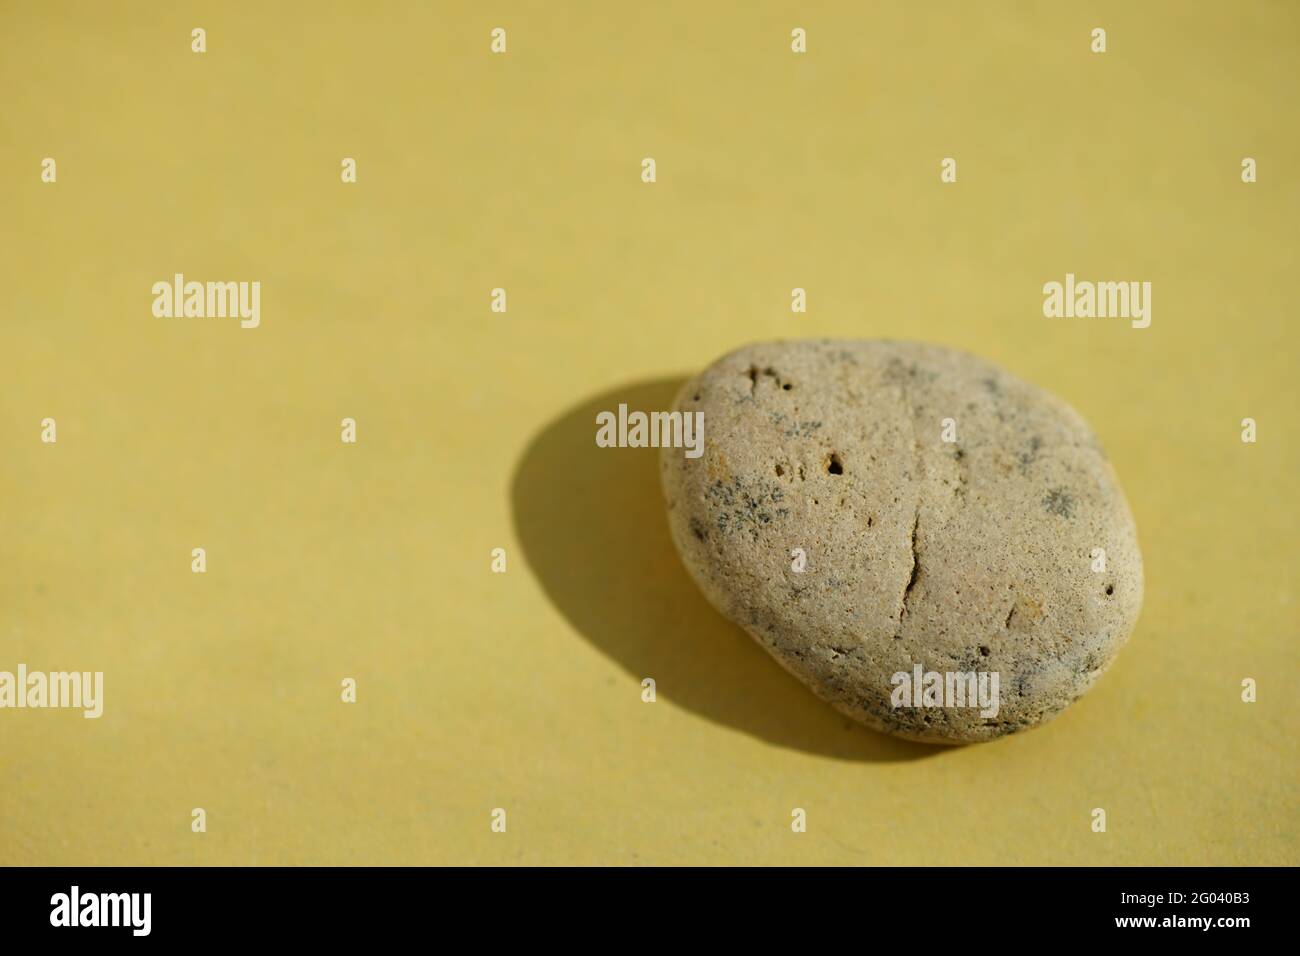 Beige pebble stone at yellow sunny table. Stock Photo